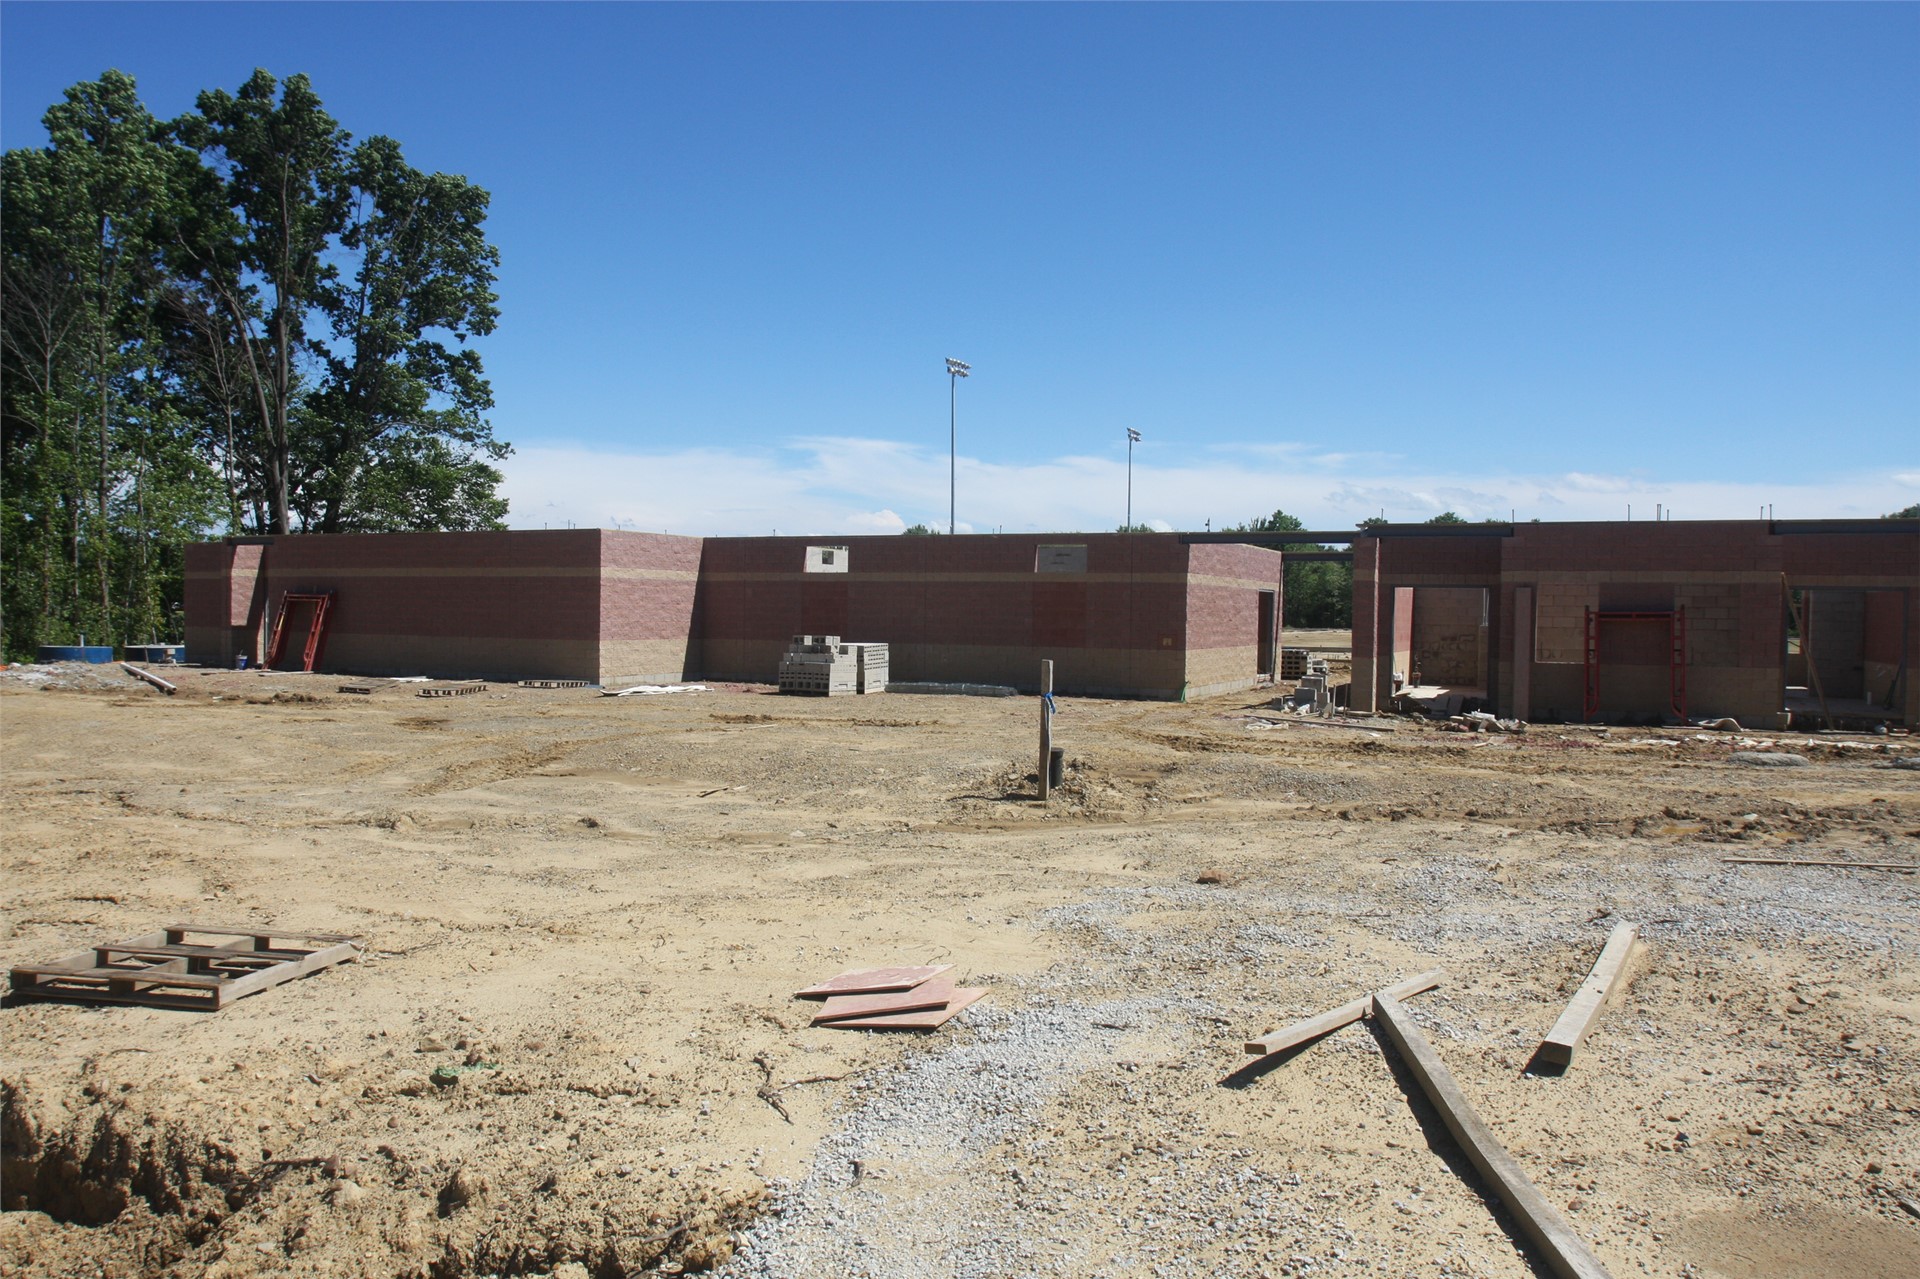 View of visitor side locker rooms/restrooms from parking lot